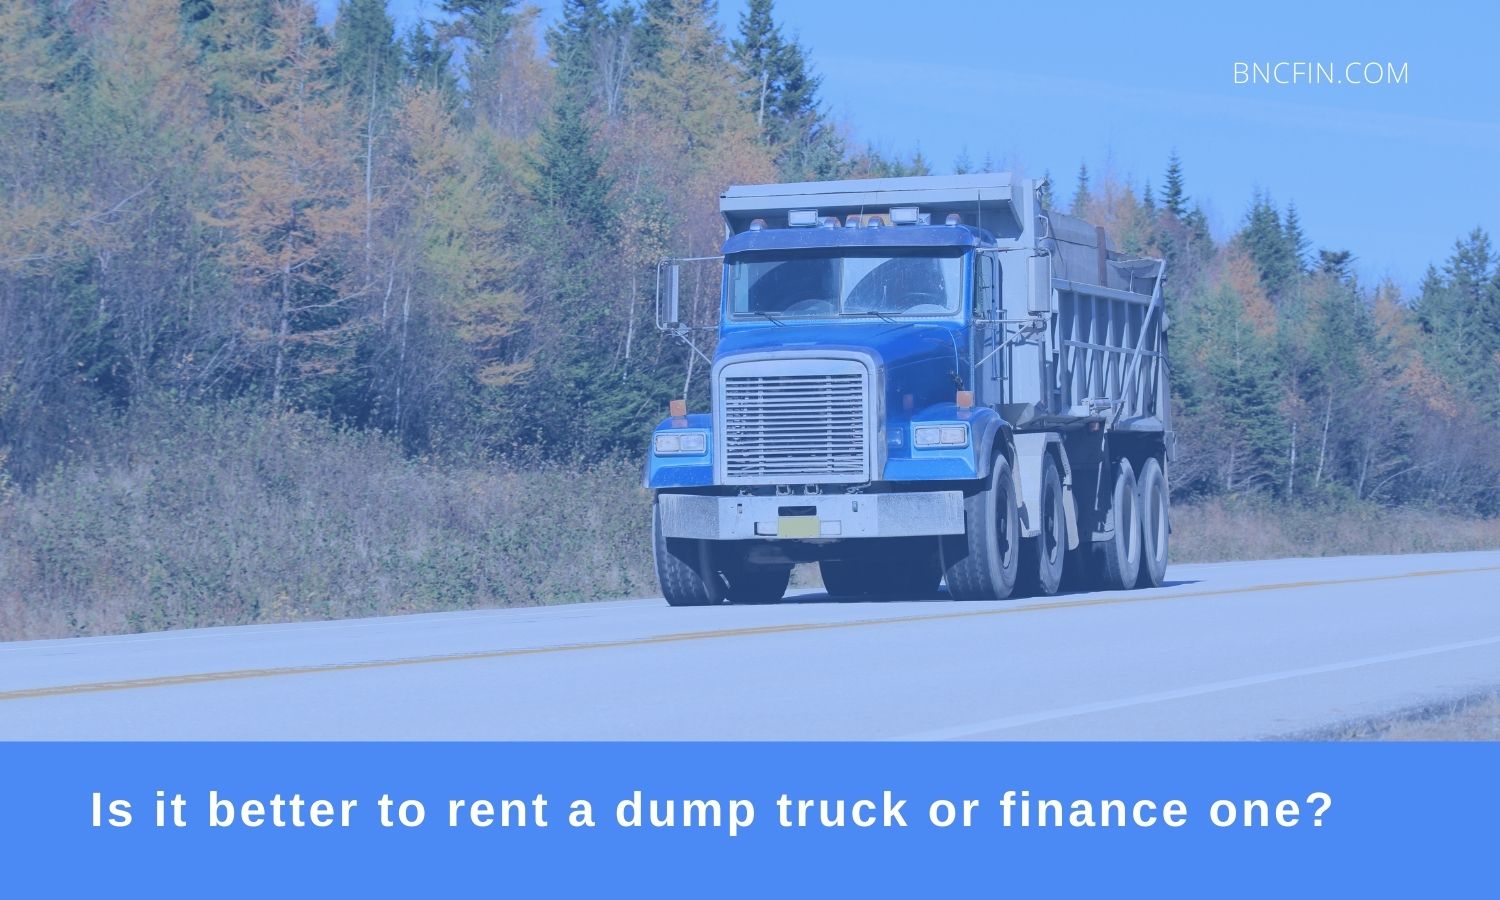 Is it better to rent or finance a dump truck